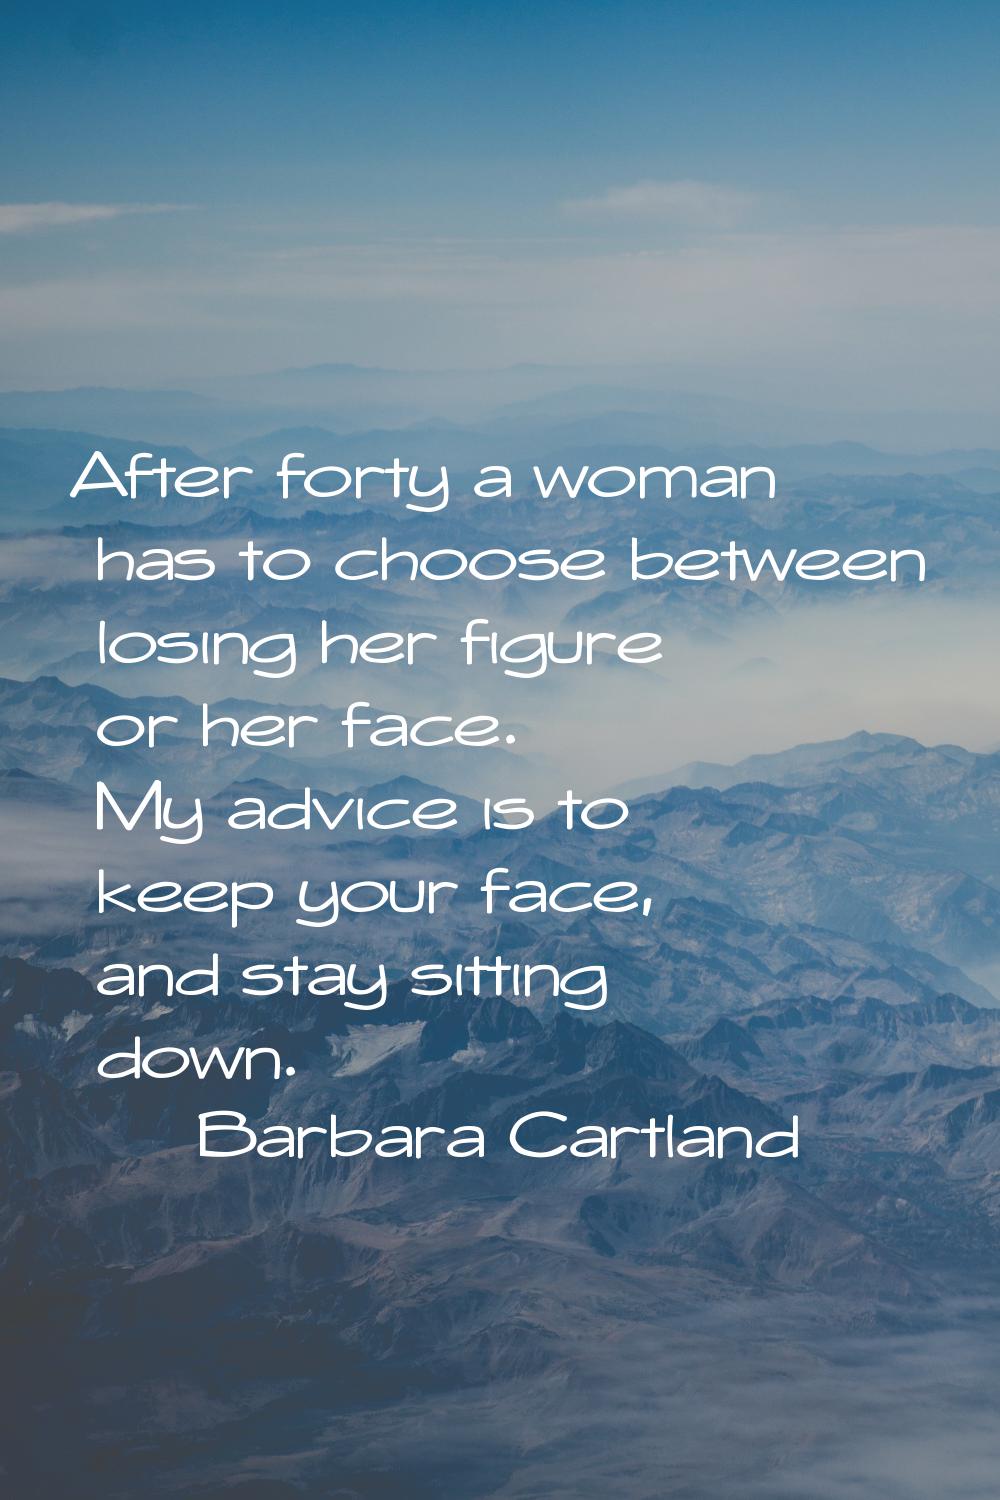 After forty a woman has to choose between losing her figure or her face. My advice is to keep your 